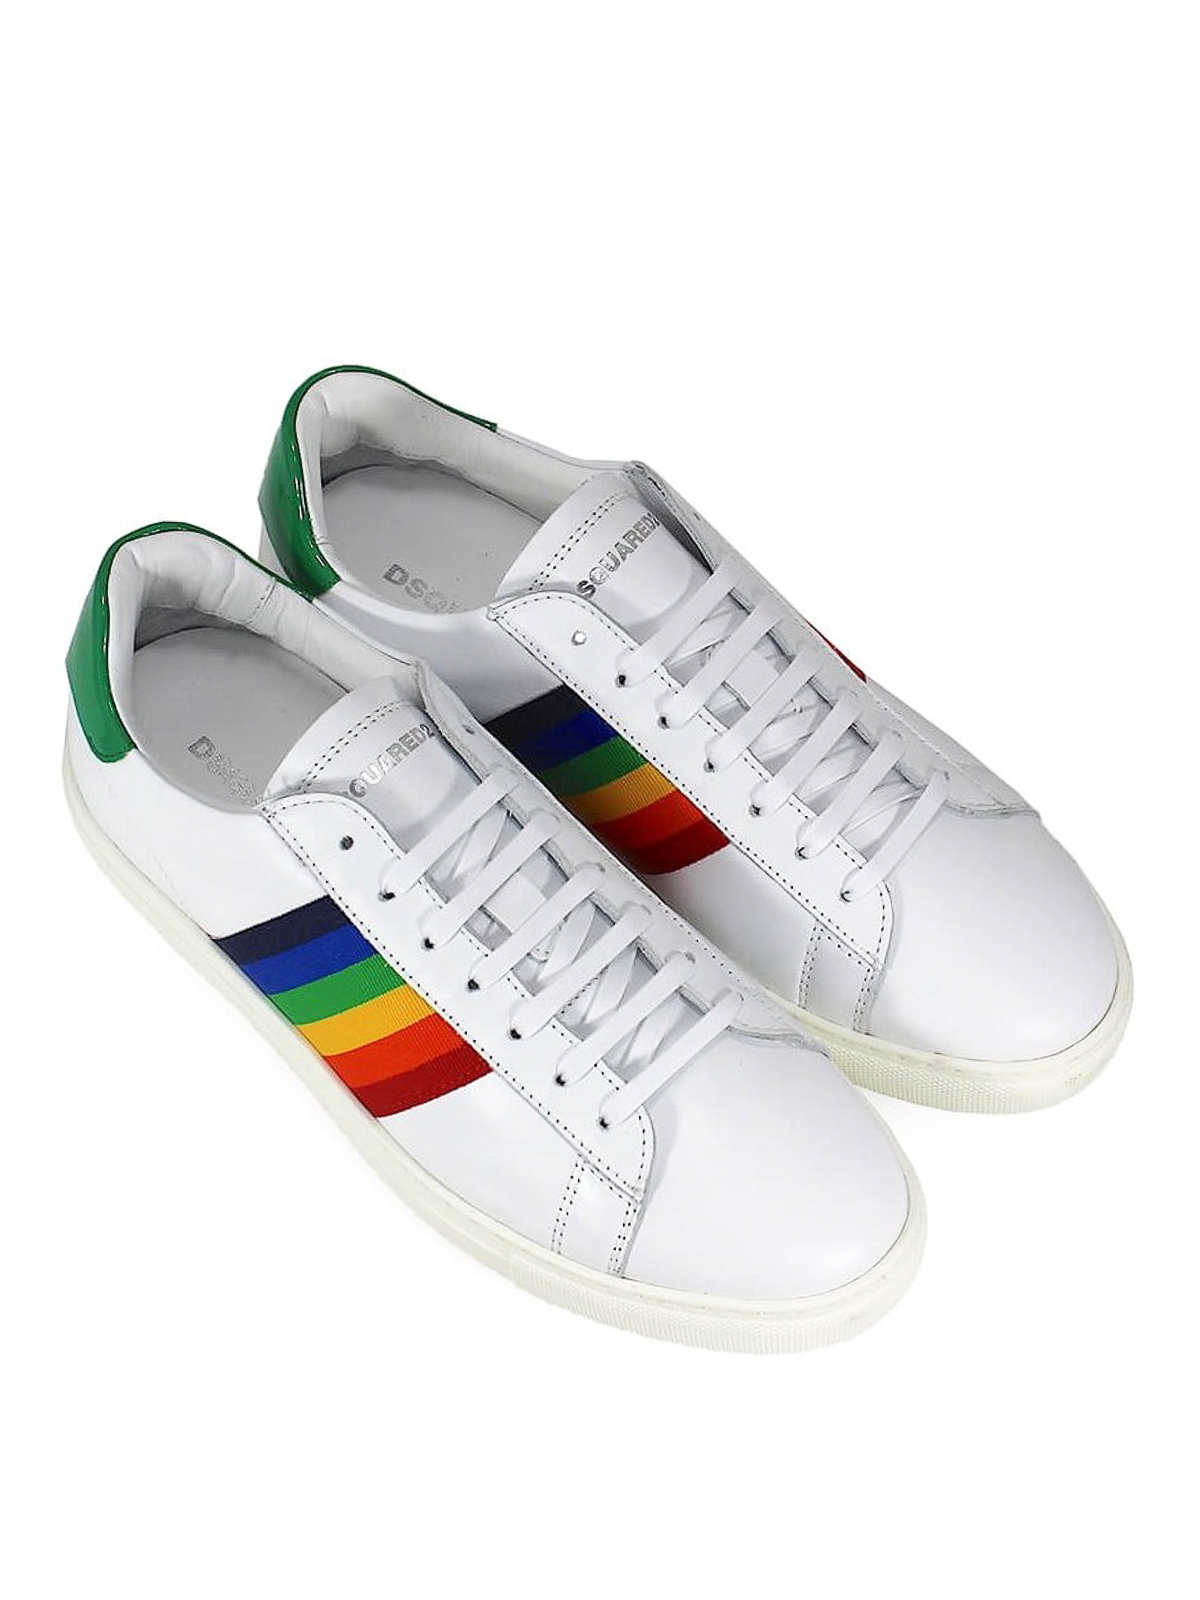 dsquared rainbow shoes